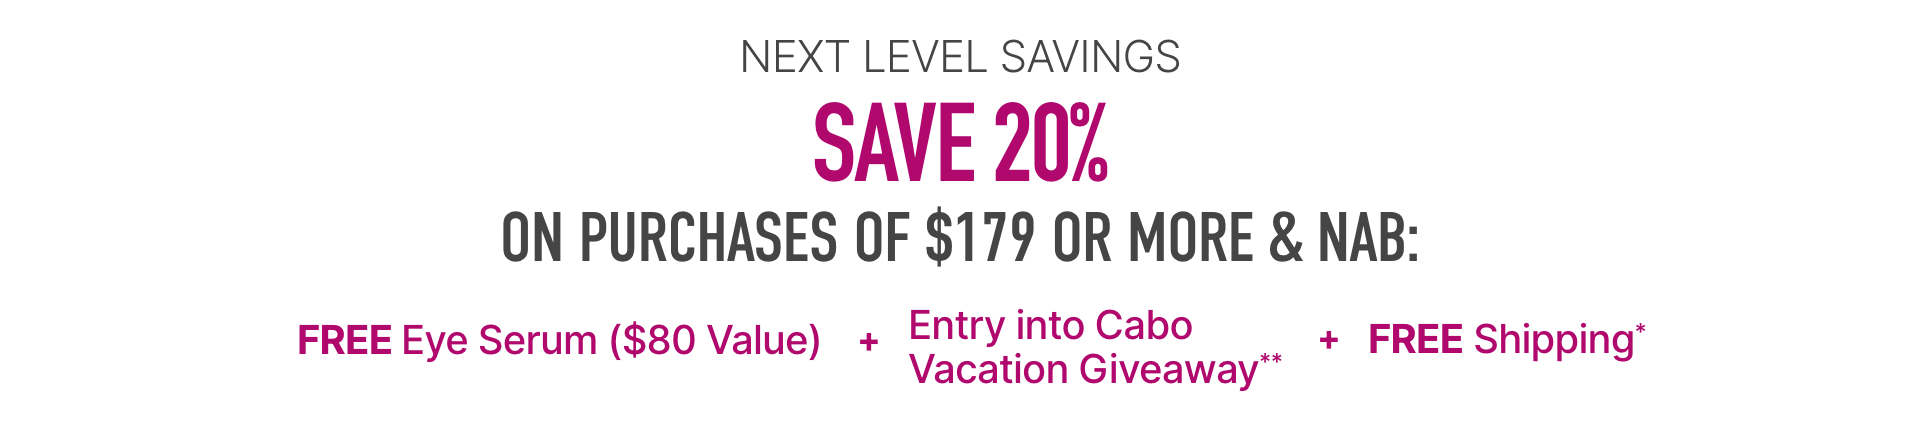 Next level savings, save 20% on purchases of $179 or more and nab free eye serum ($80 value) + entry into Cabo vacation giveaway** + free shipping*